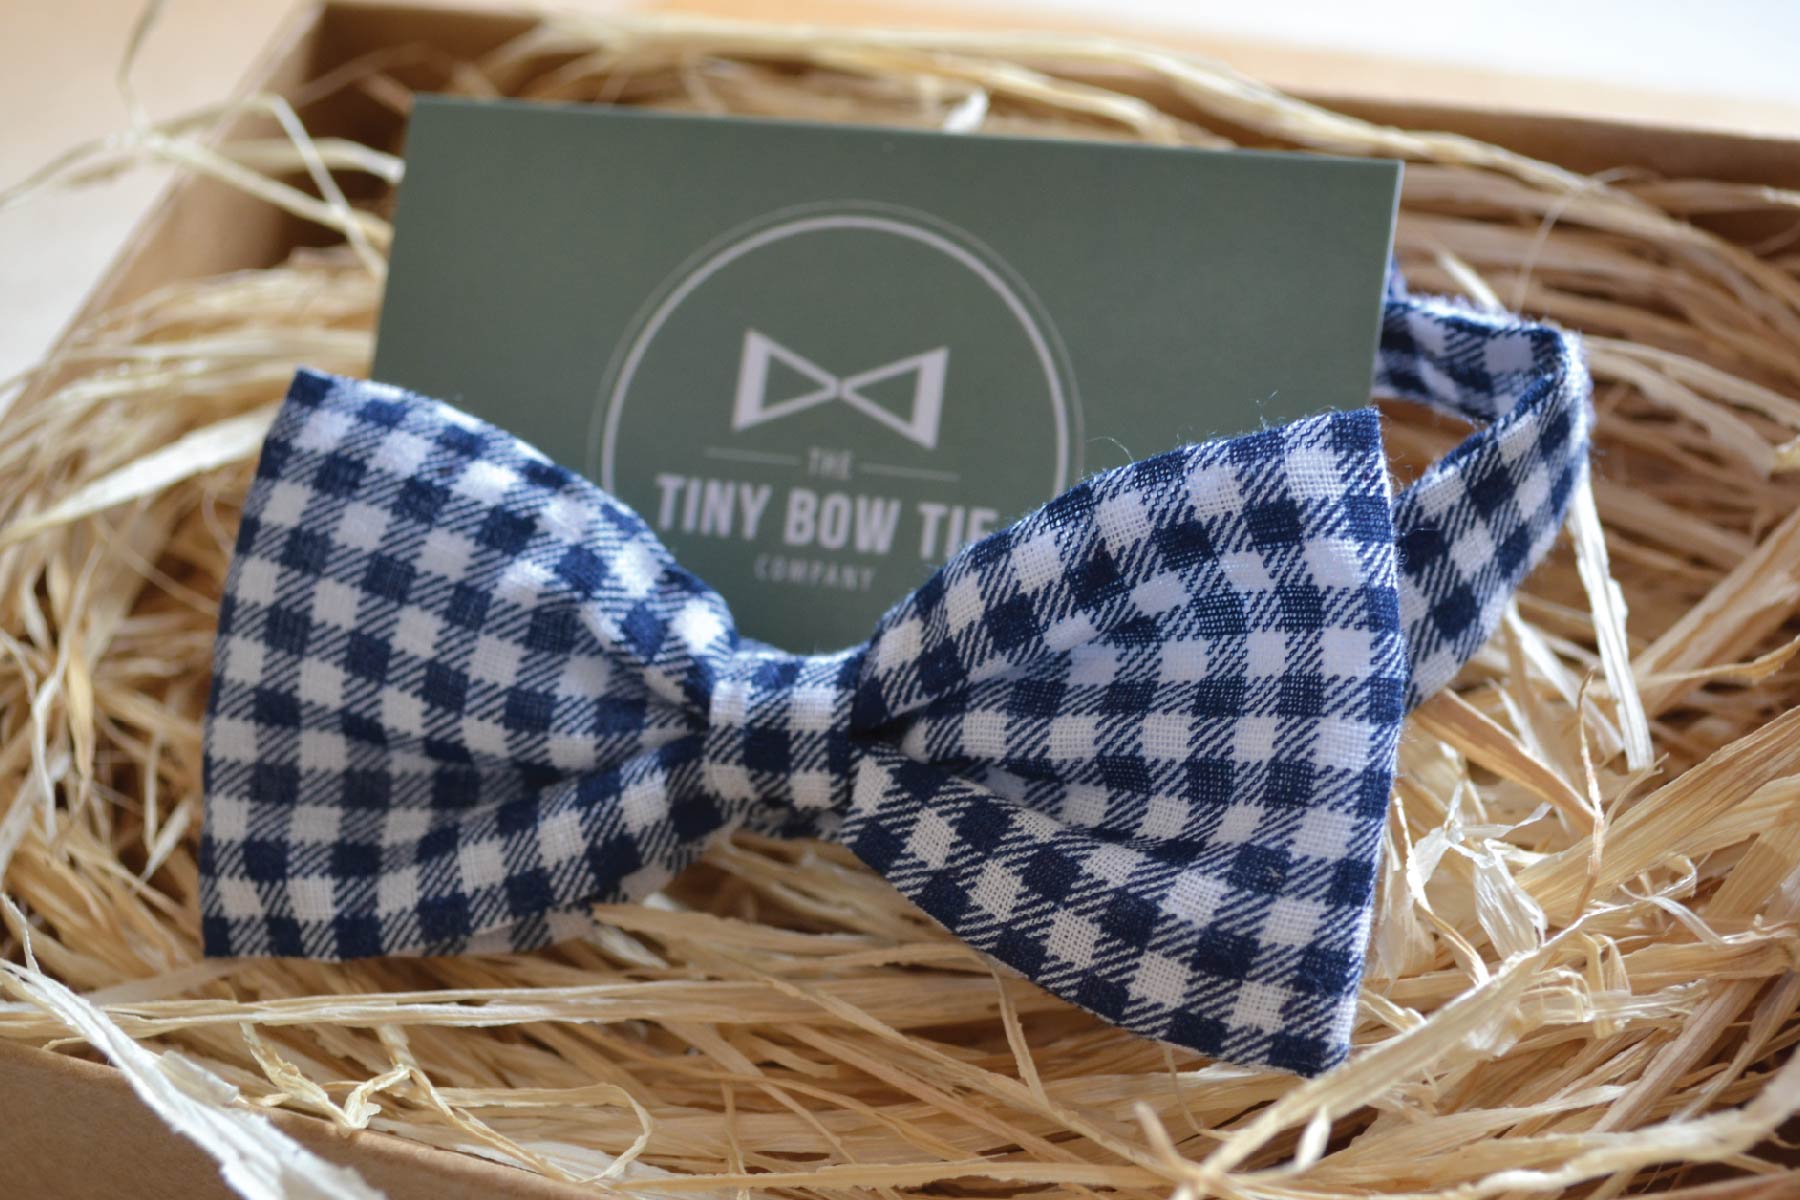 Navy Gingham Bow Tie